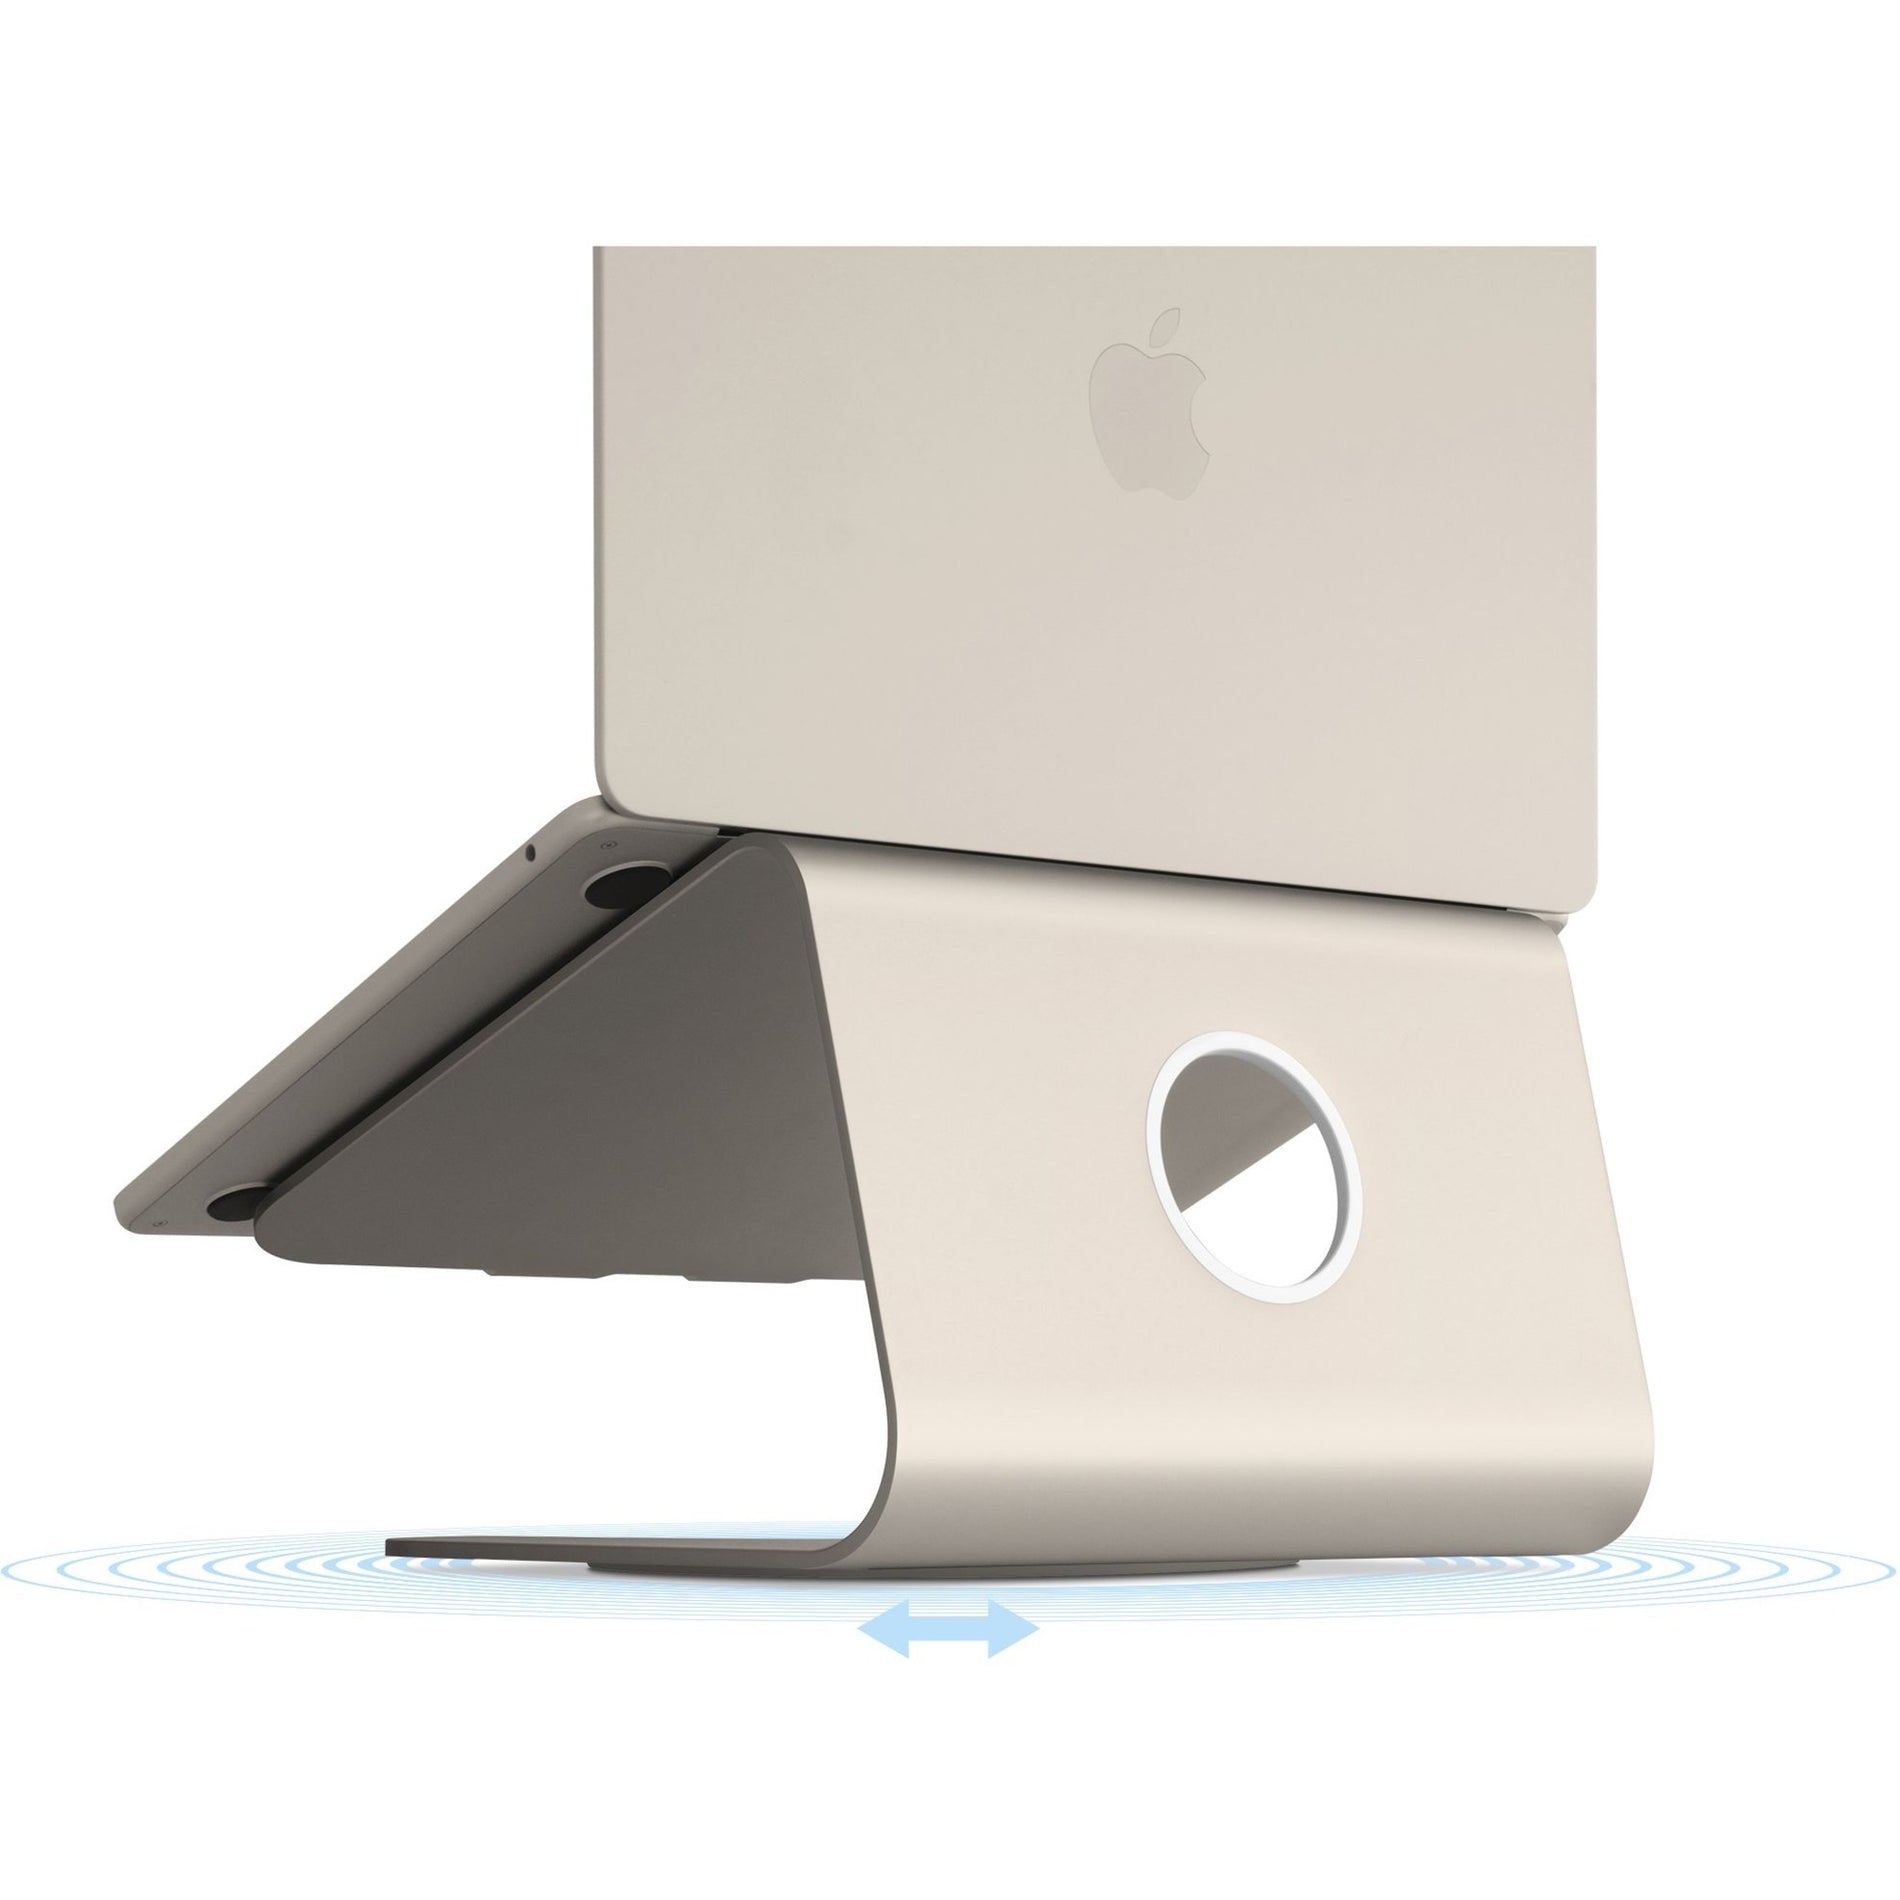 Rain Design 10093 mStand360 Laptop Stand w/ Swivel Base - Starlight, Cable Management, Ventilated, 360° Swivel Base